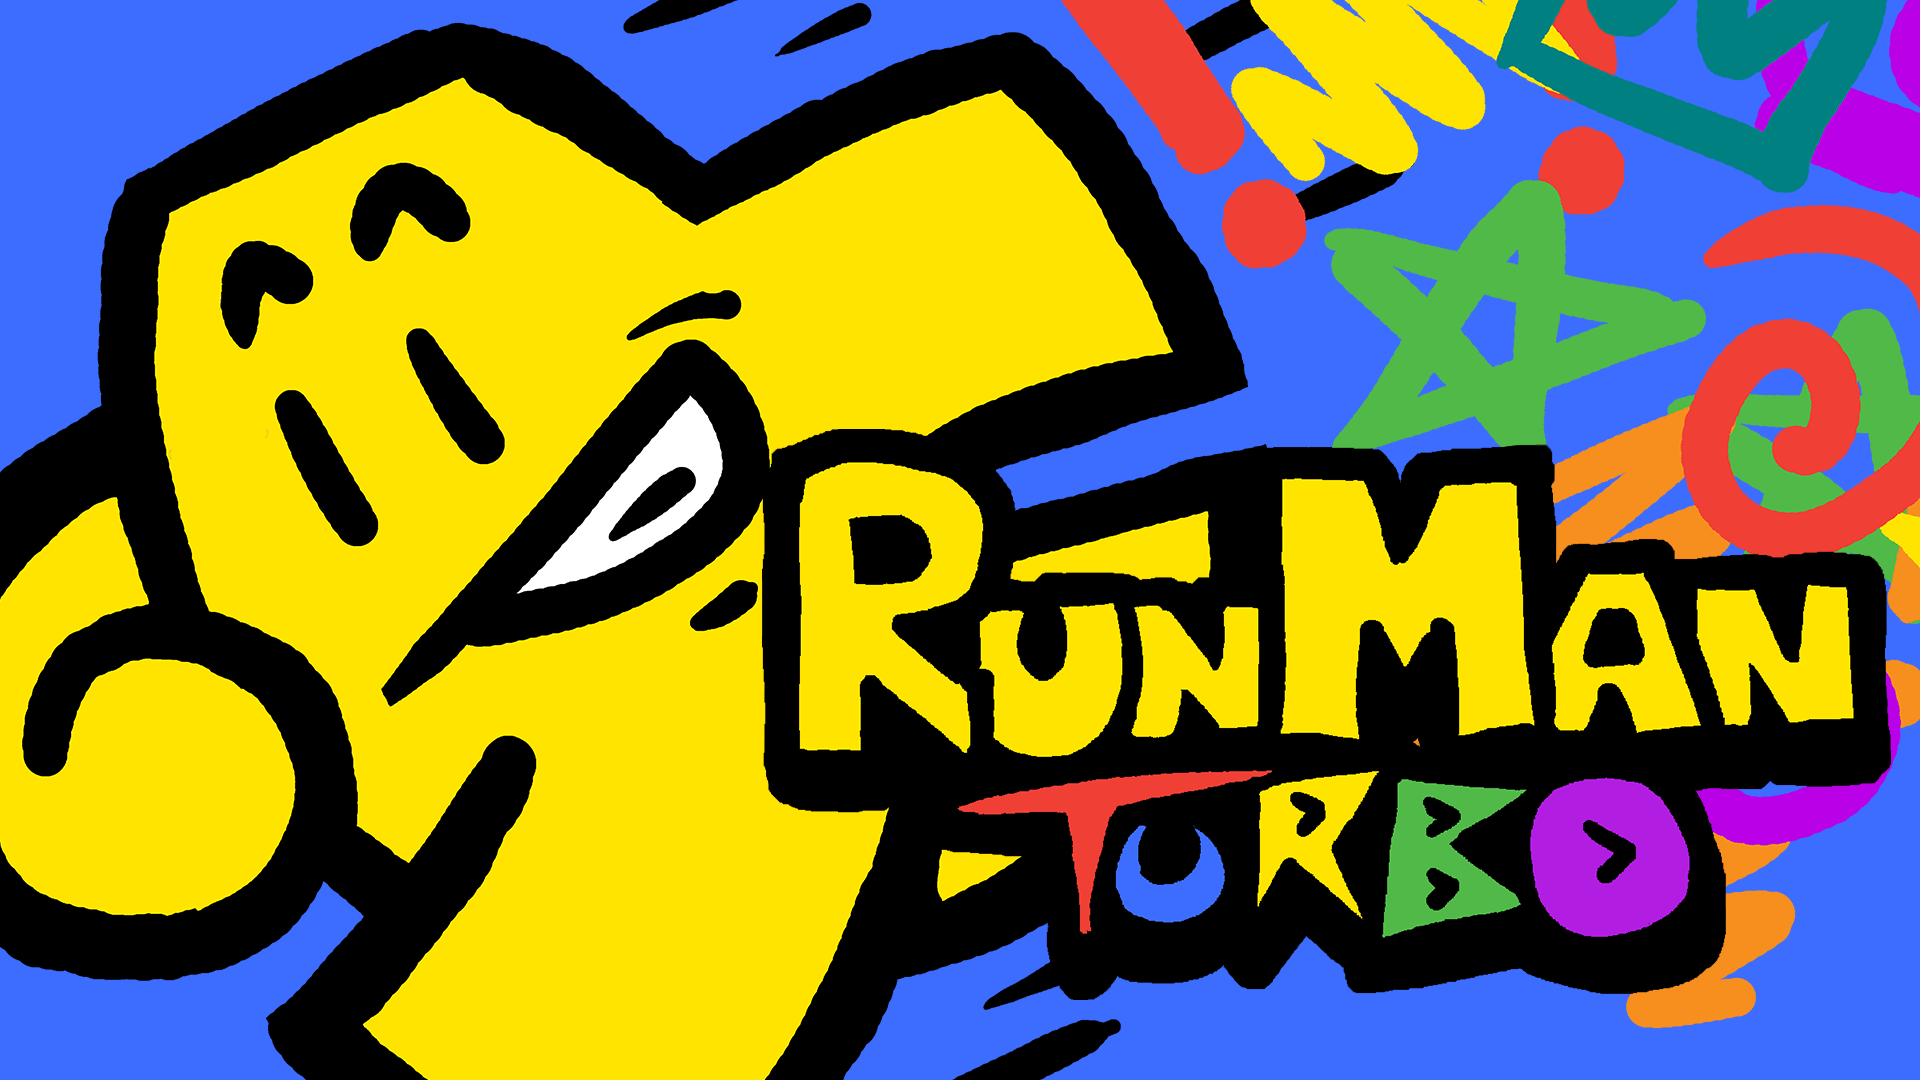 RUNMAN: RACE AROUND THE WORLD - Play for Free!